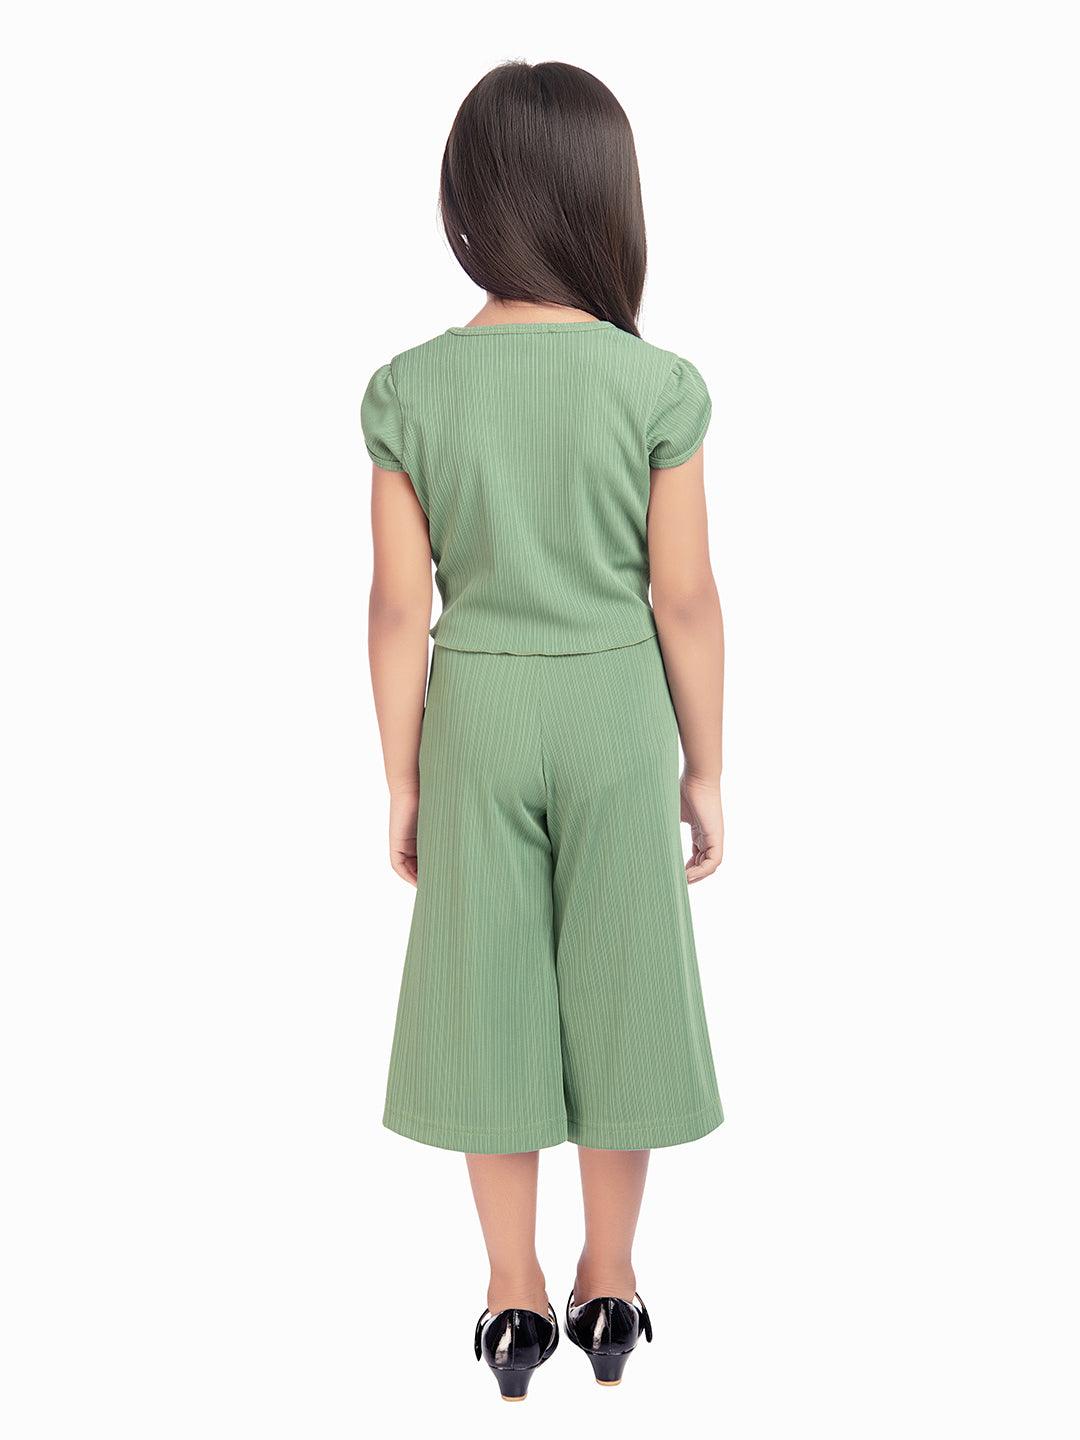 Tiny Baby Green Colored Culottes-2090 Green - TINY BABY INDIA shop.tinybaby.in